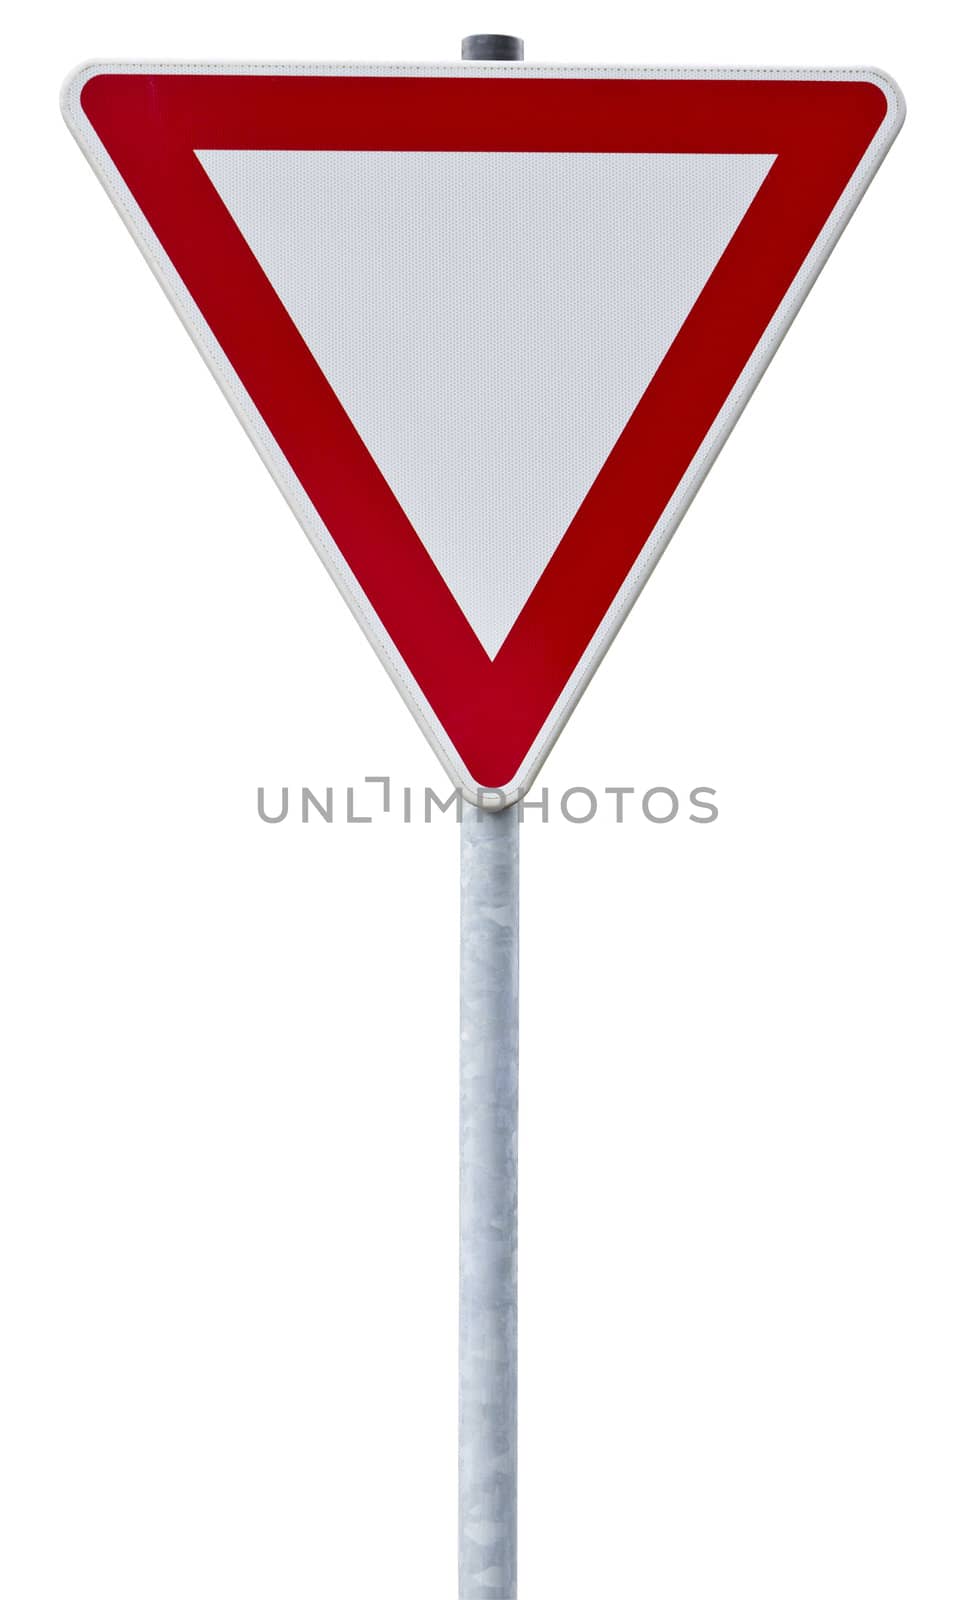 german give way sign with clipping path, isolated on white